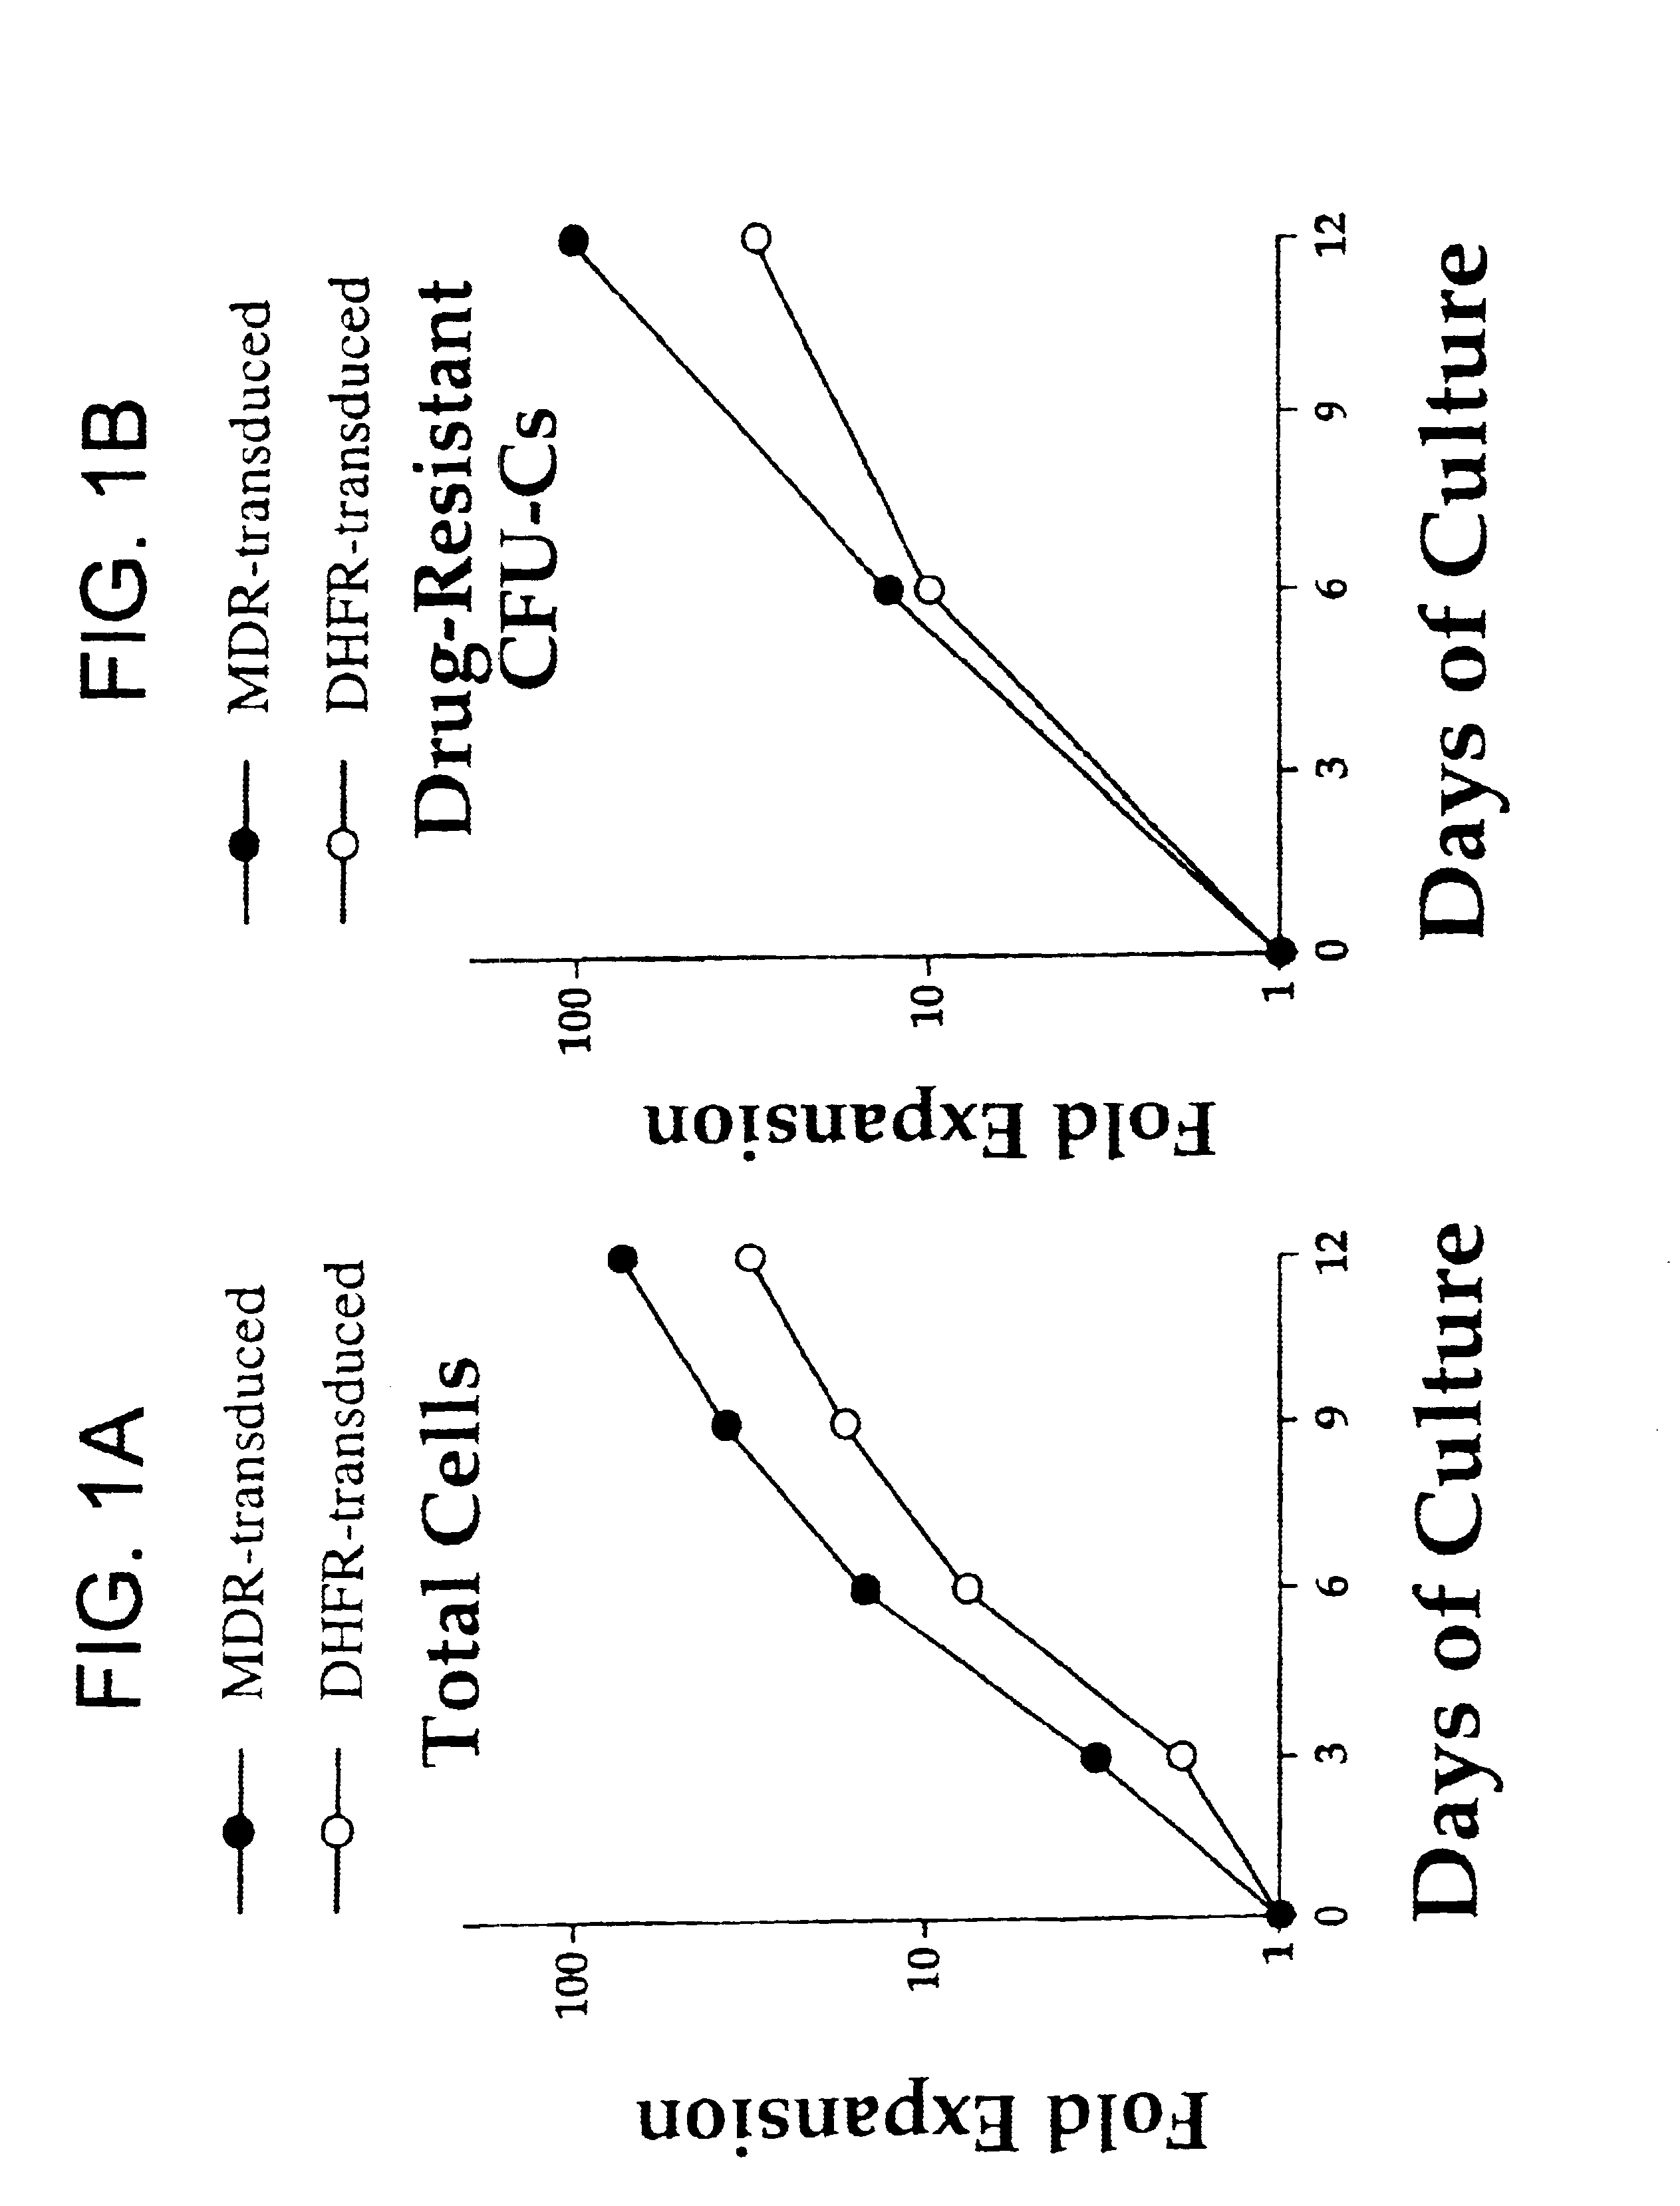 Relationship of ABC transport proteins with hematopoietic stem cells and methods of use thereof